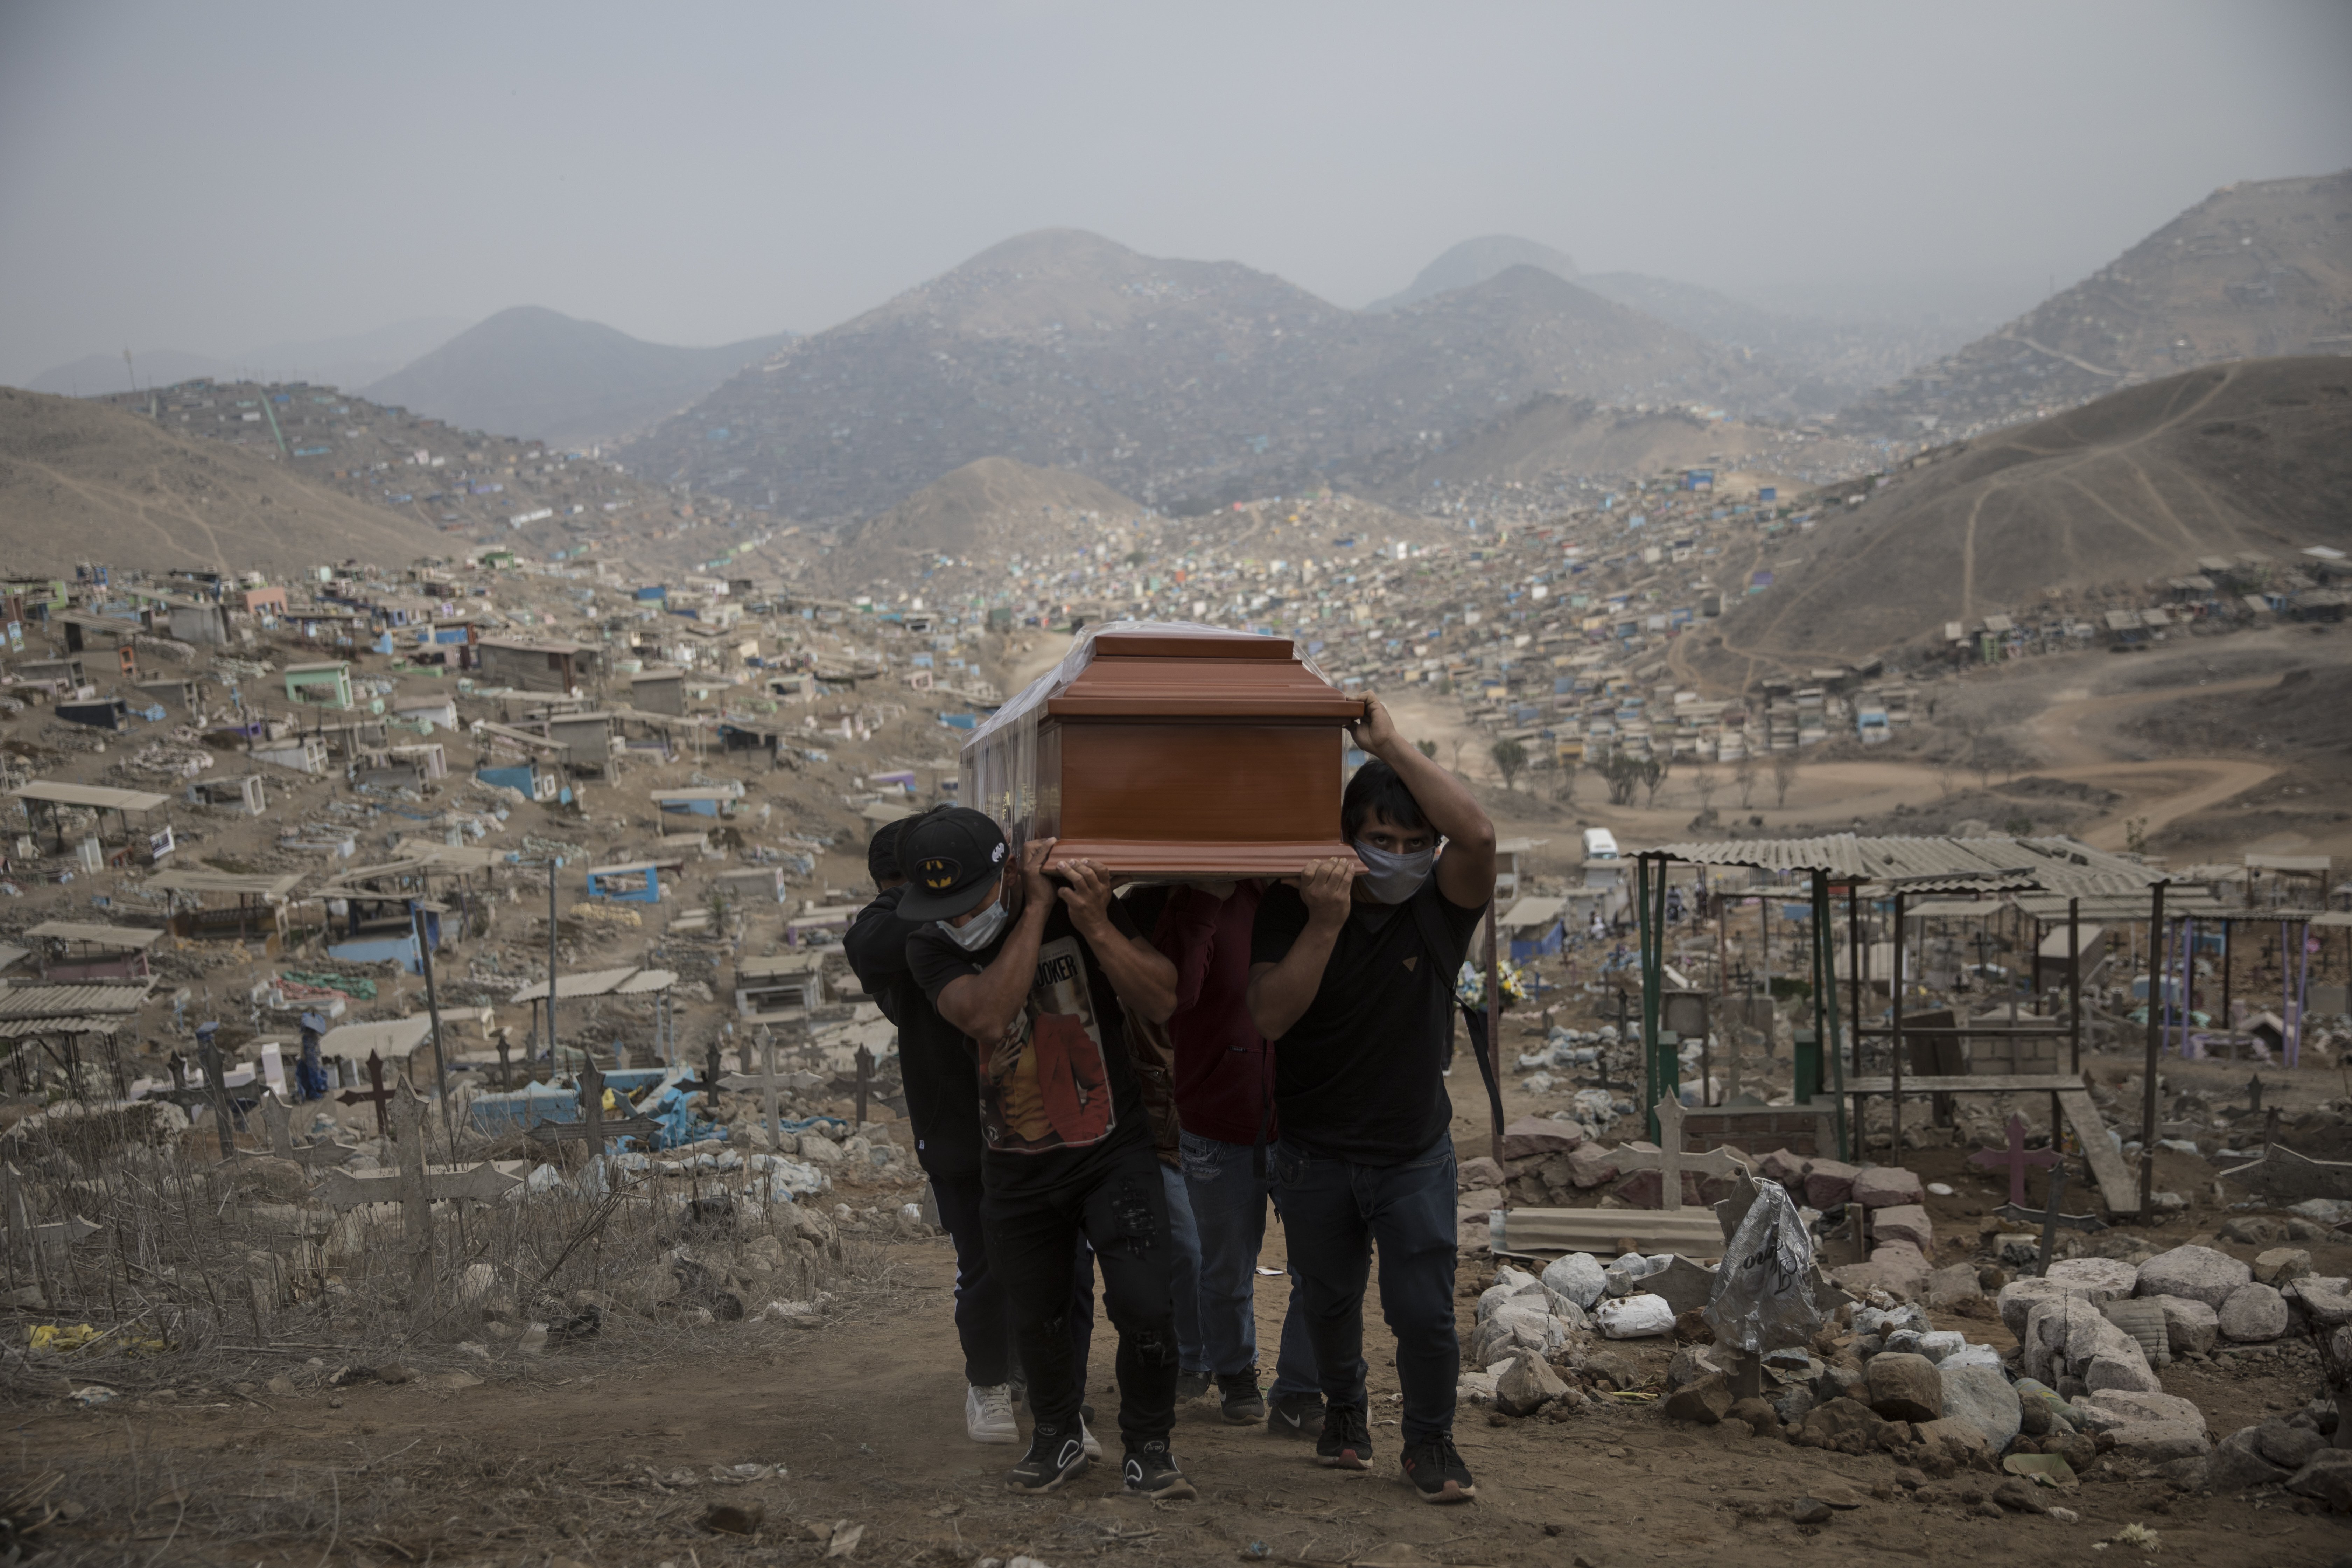 Relatives carry the coffin of a suspected Covid-19 victim at the Nueva Esperanza cemetery on the outskirts of Lima, Peru, on Thursday, May 28.